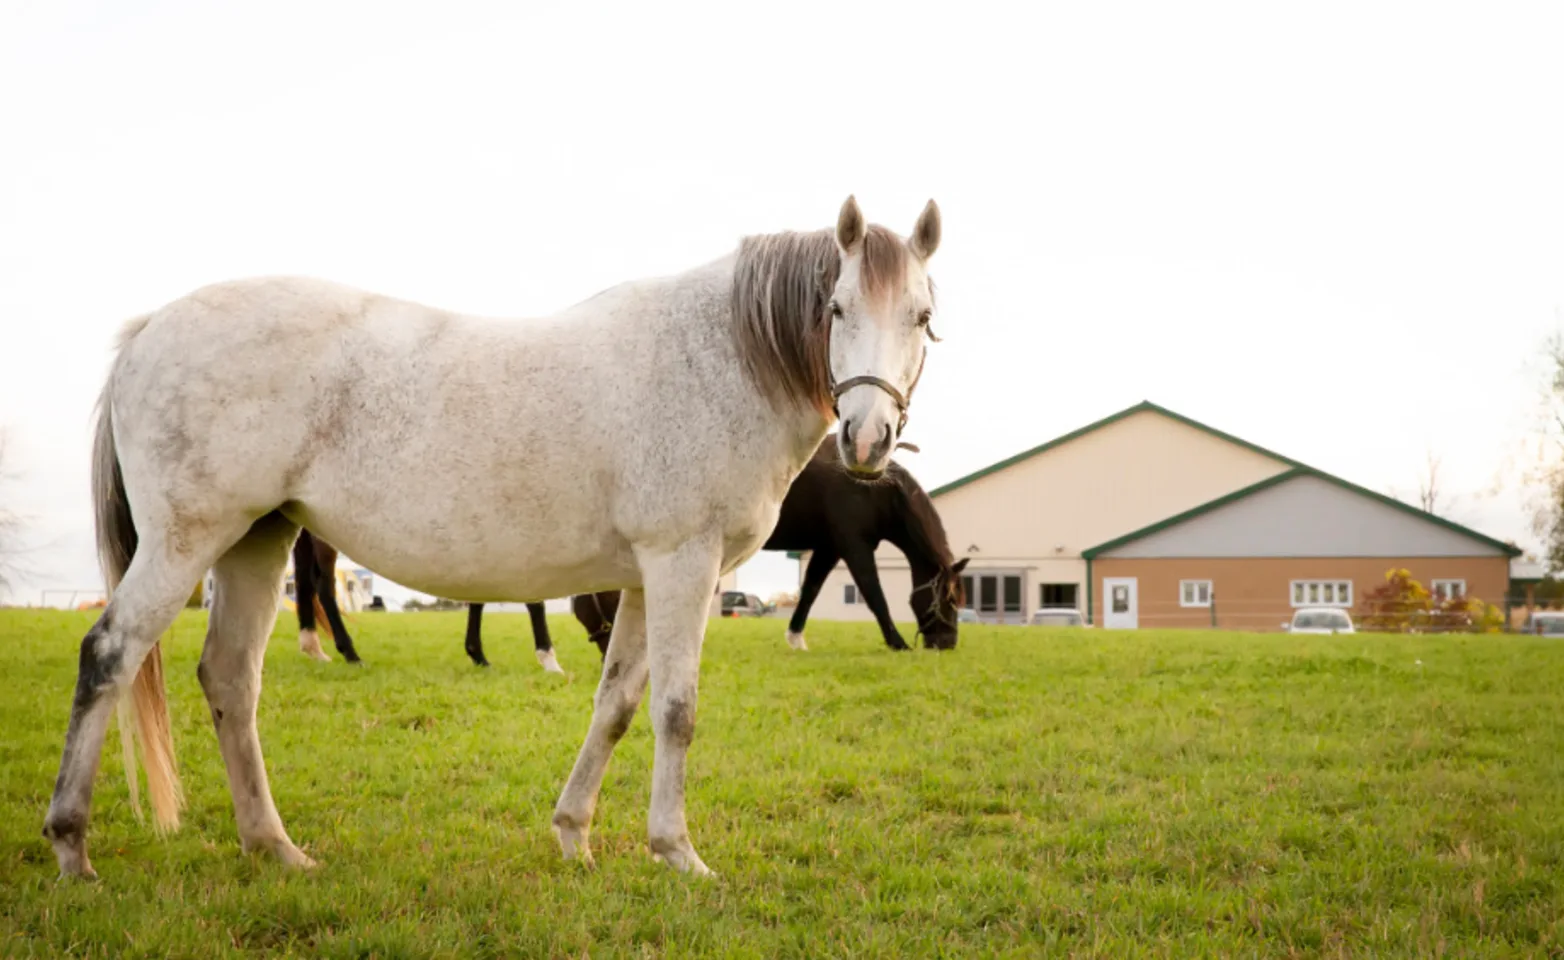 A white horse and two brown horses in a field